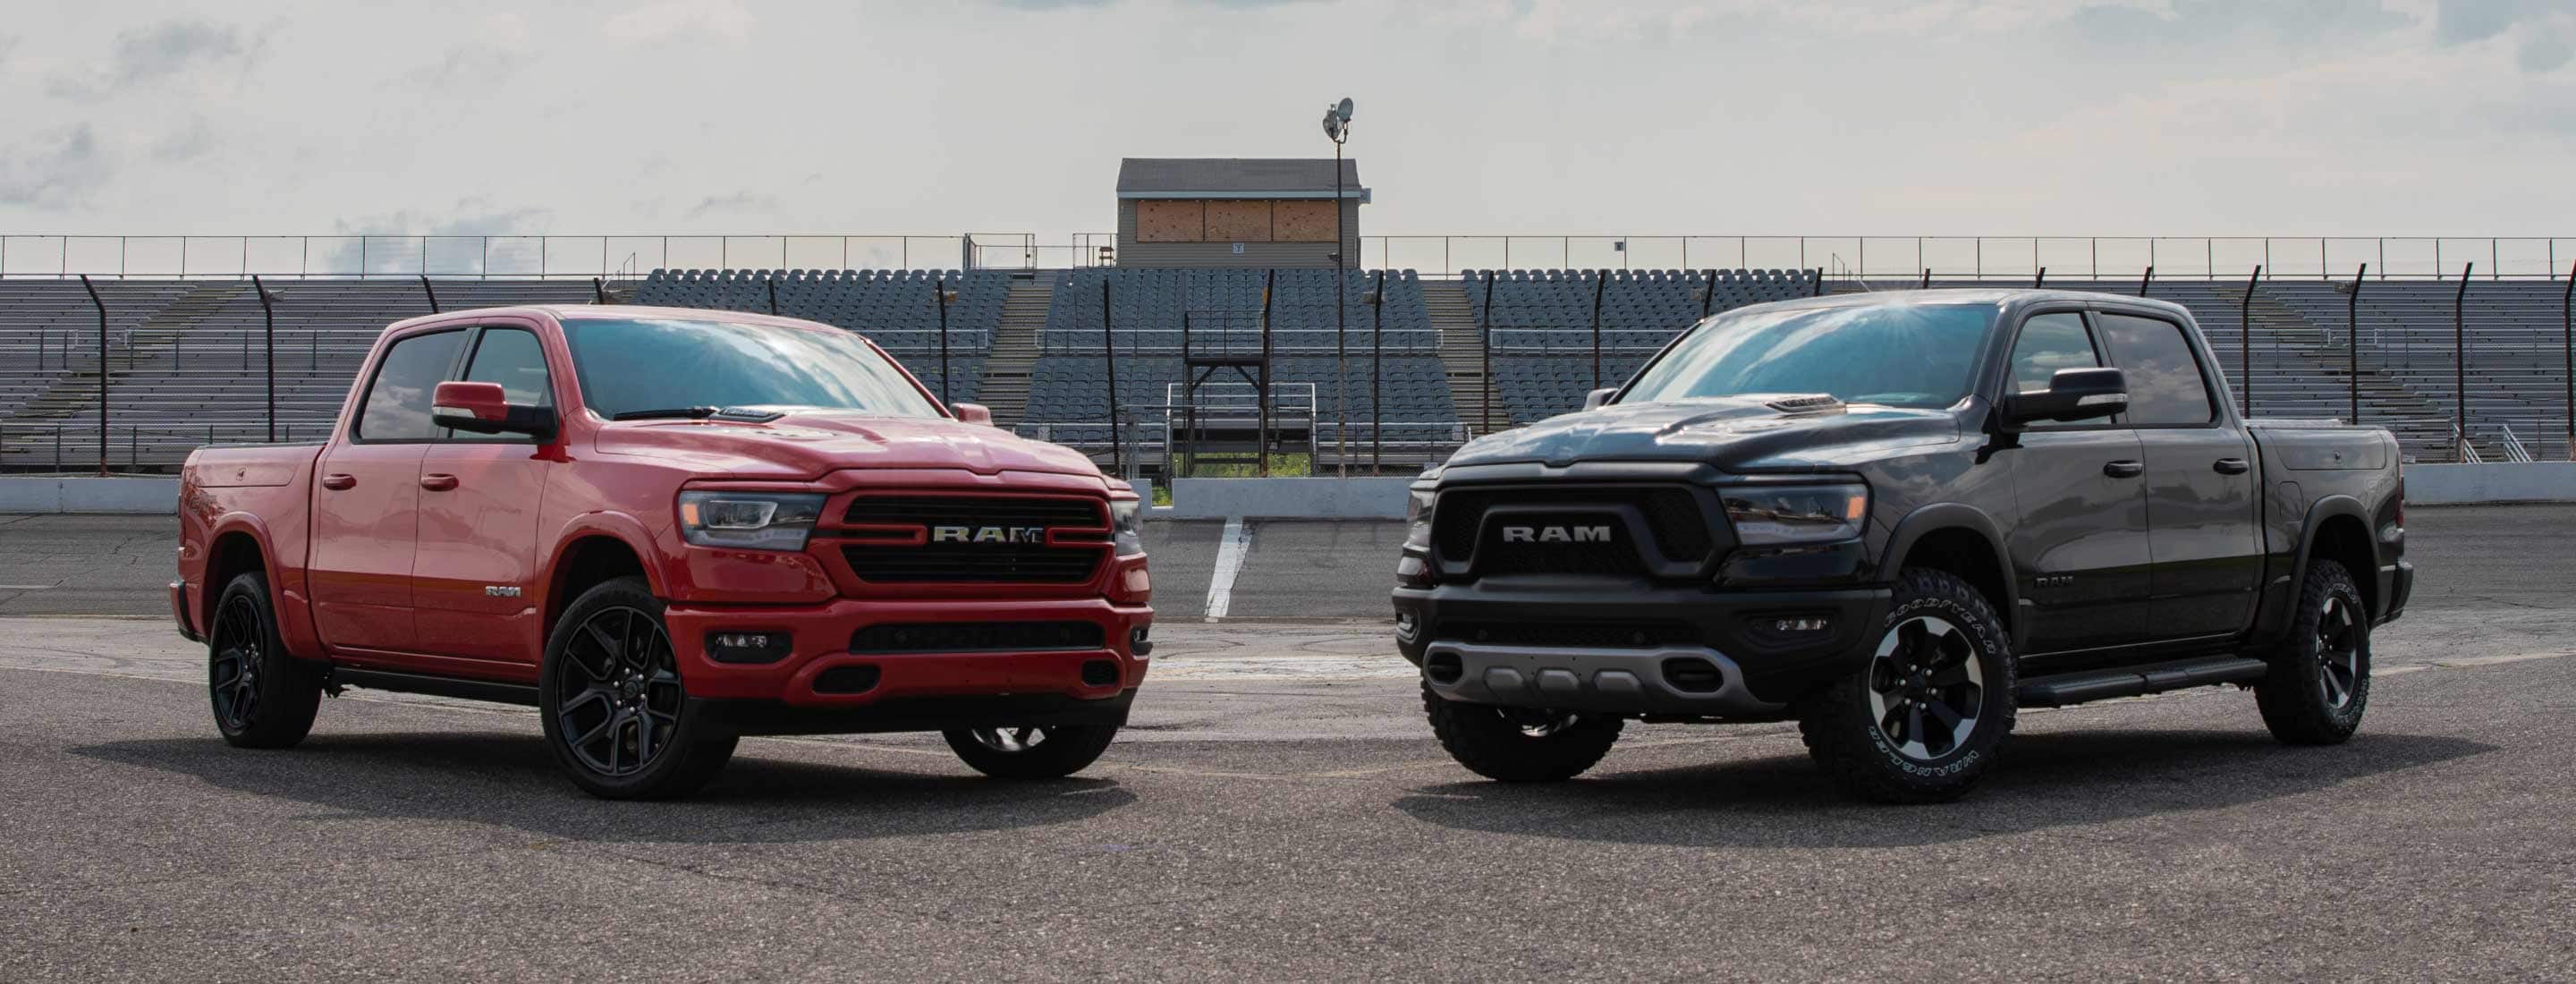 The 2022 Ram 1500 Laramie G/T and Rebel G/T parked on a racetrack in front of the bleachers.